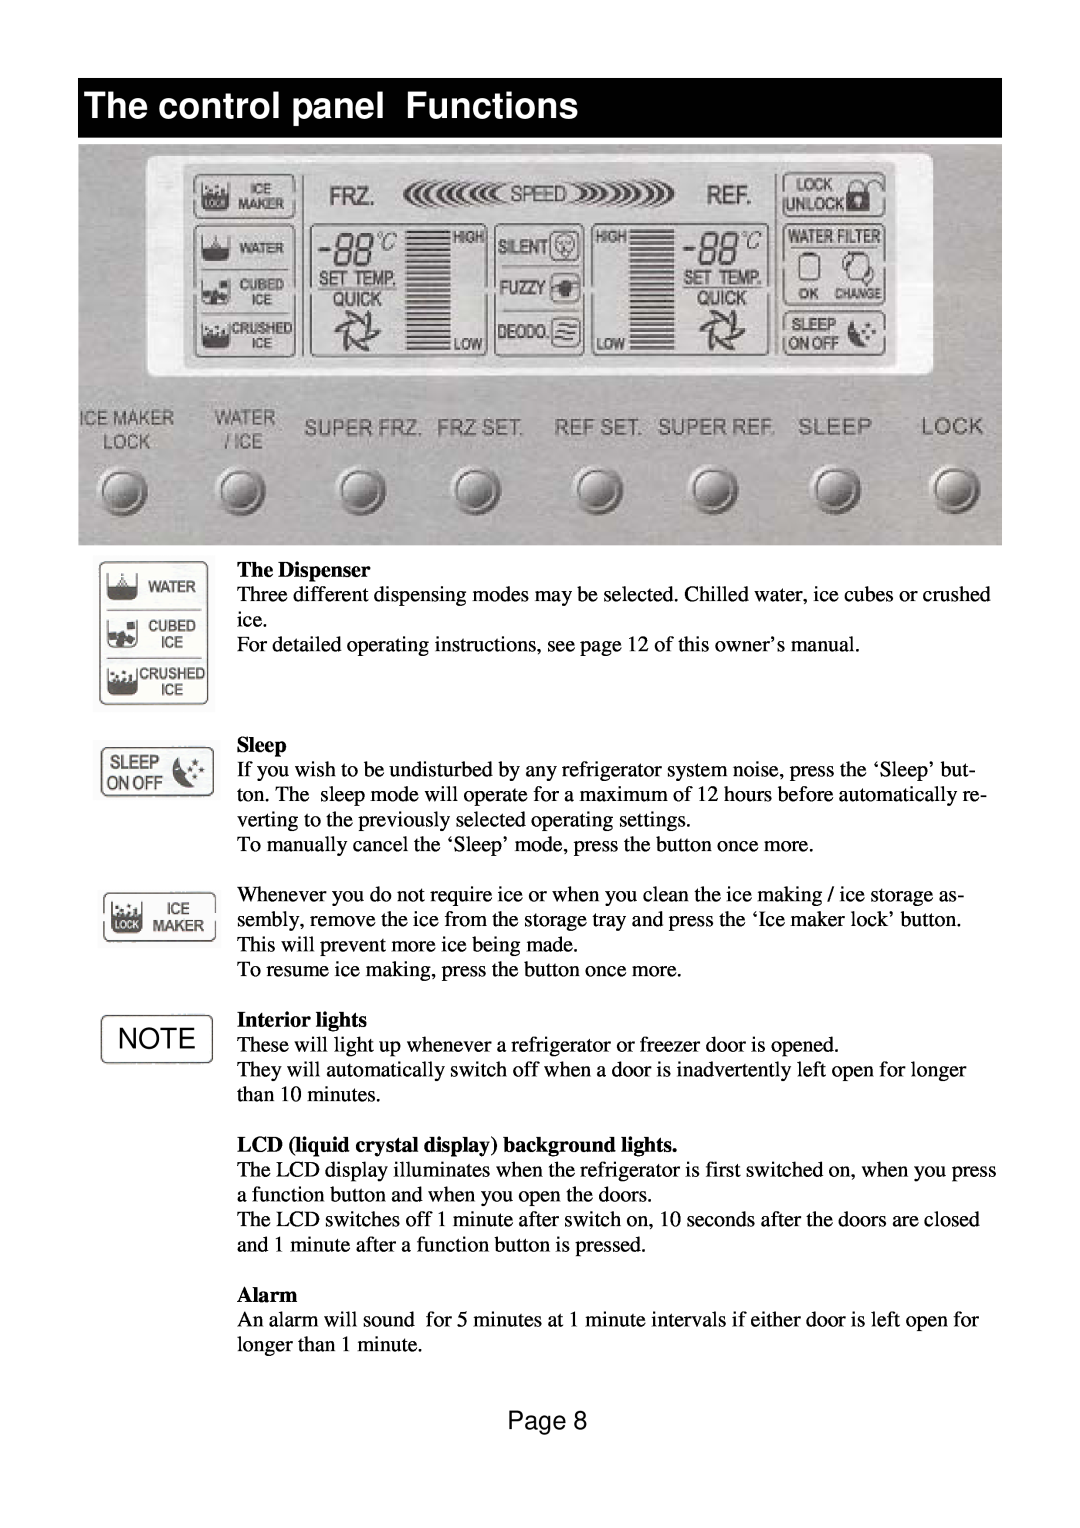 Defy Appliances F 600 LM owner manual The control panel Functions, The Dispenser, Sleep, Interior lights, Alarm 